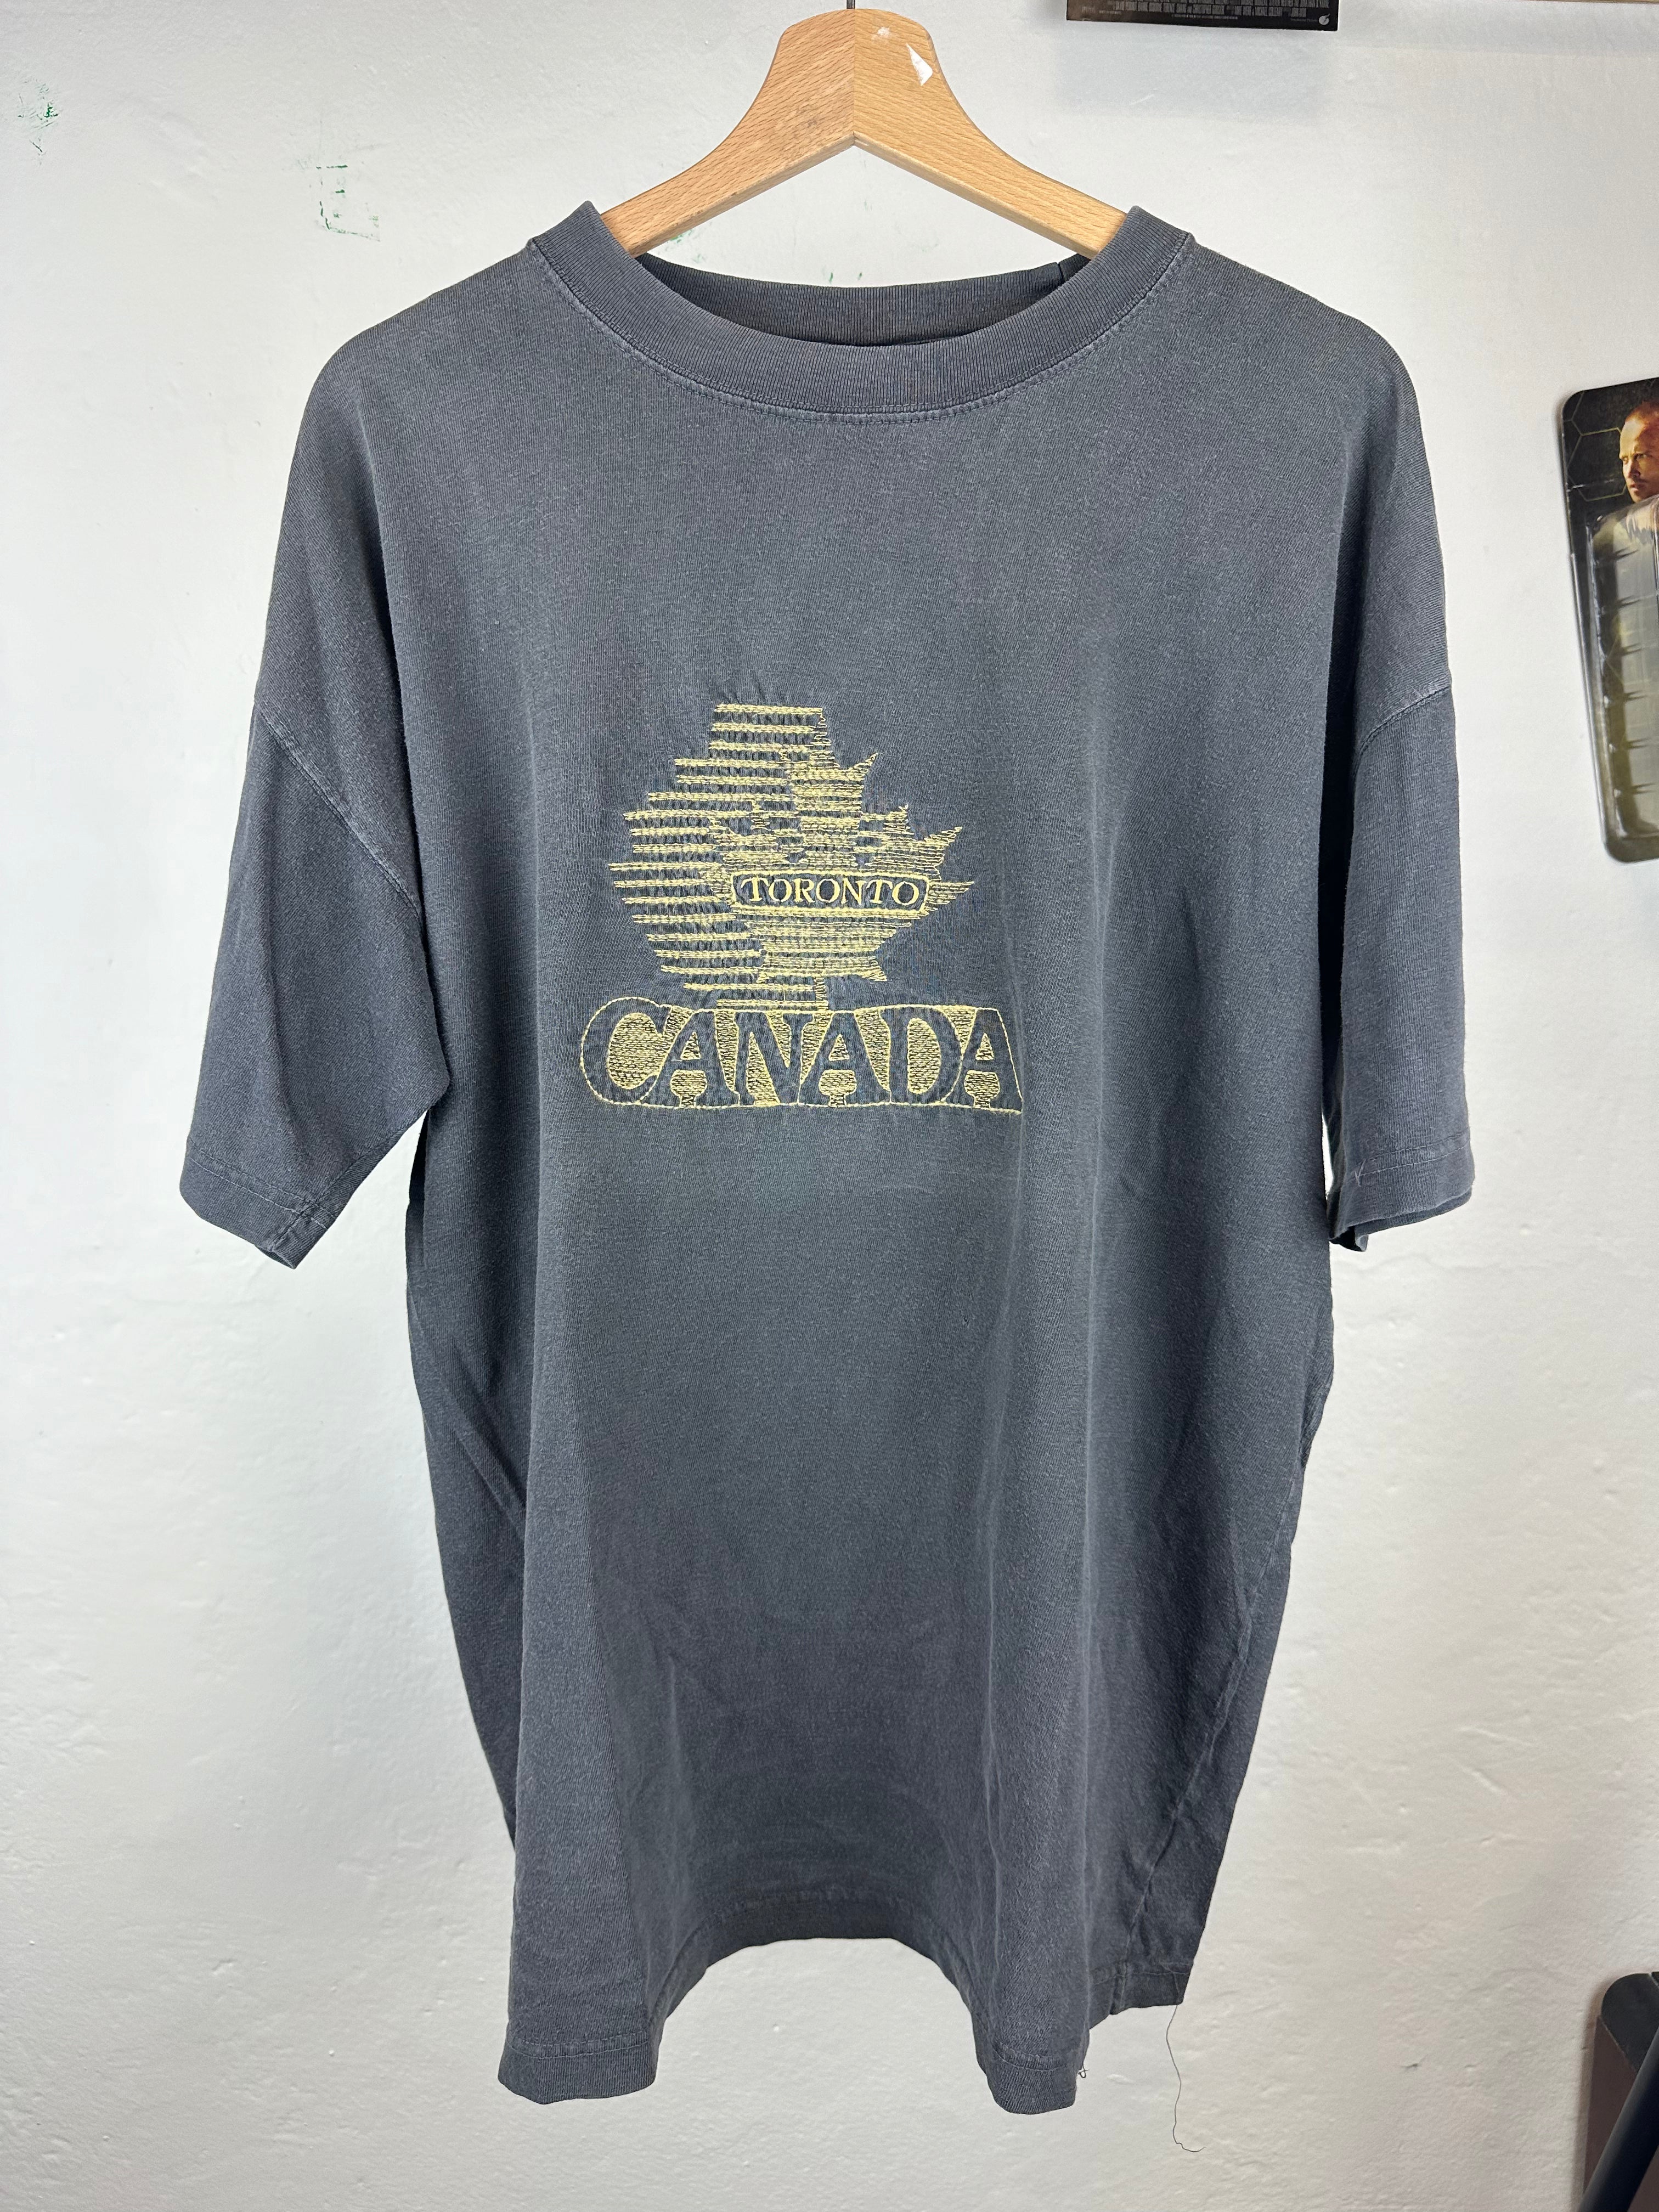 Vintage Canada 90s Faded T-shirt - size XL